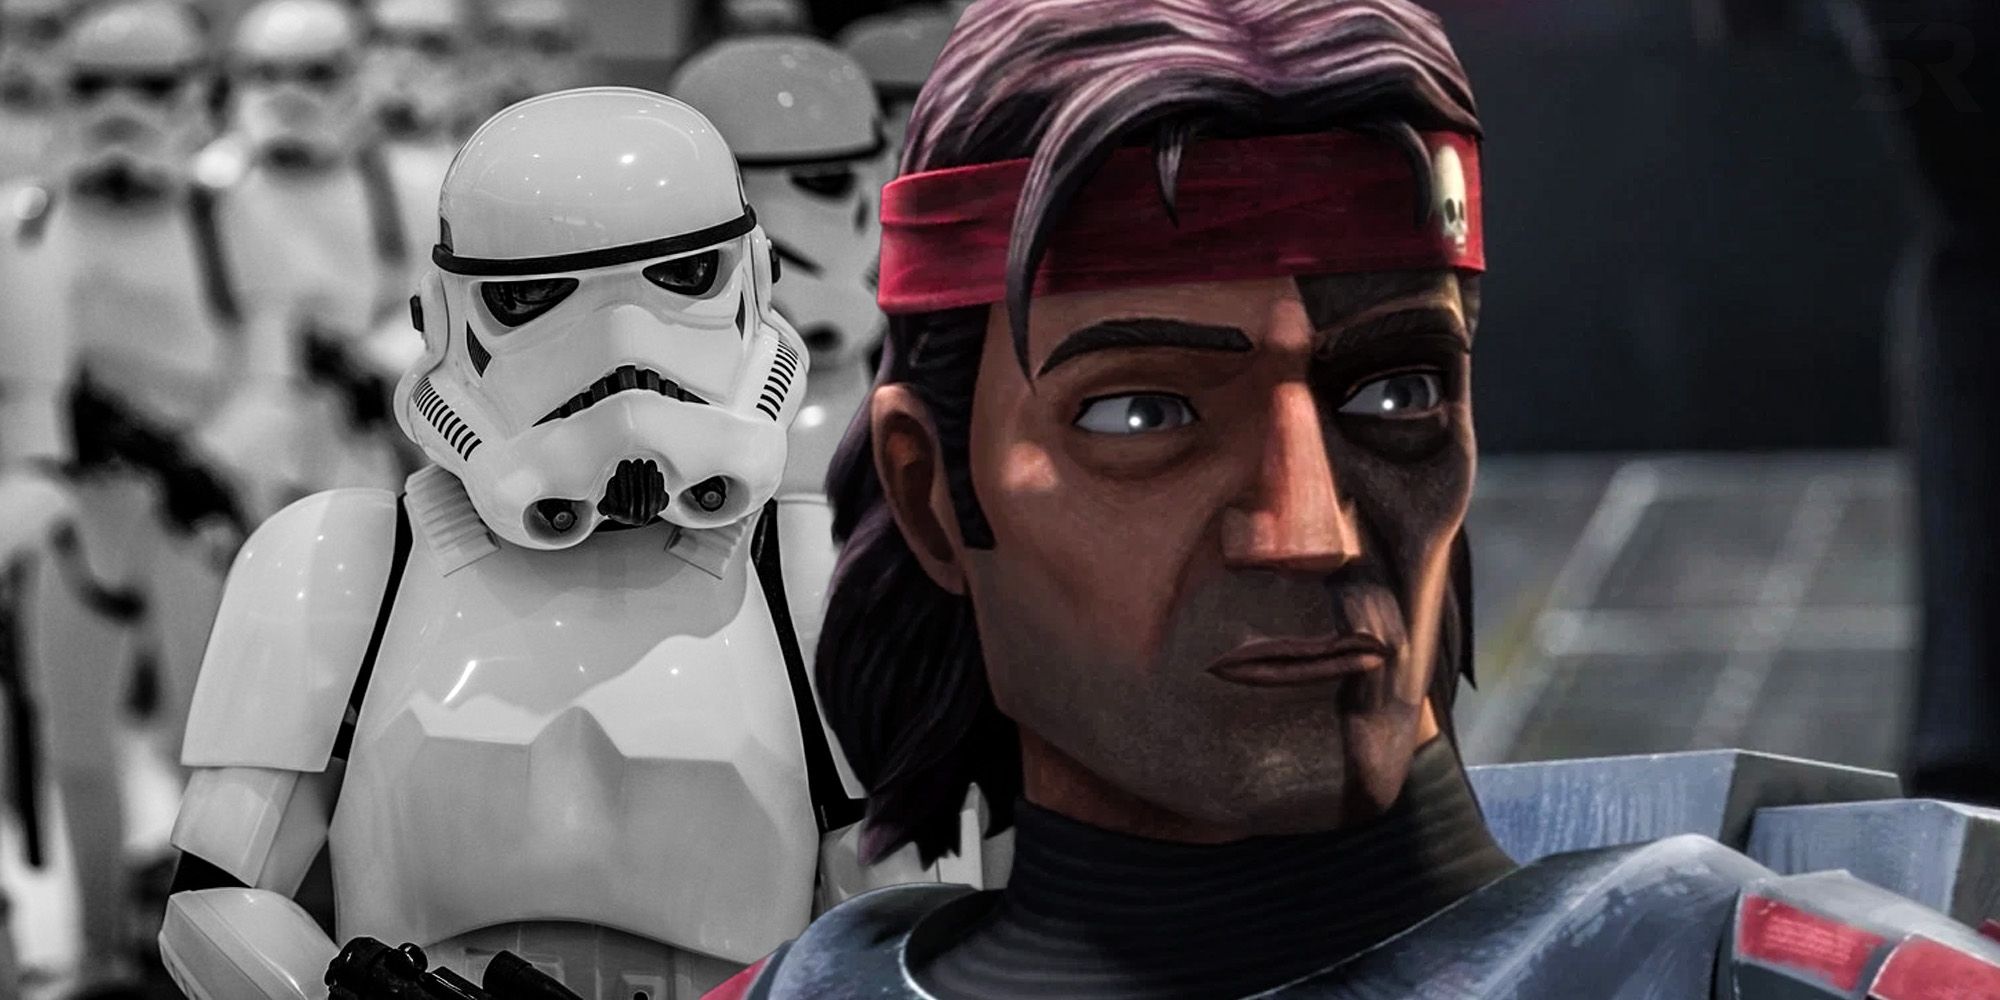 The Bad Batch Reveals Another Reason The Empire Created Stormtroopers